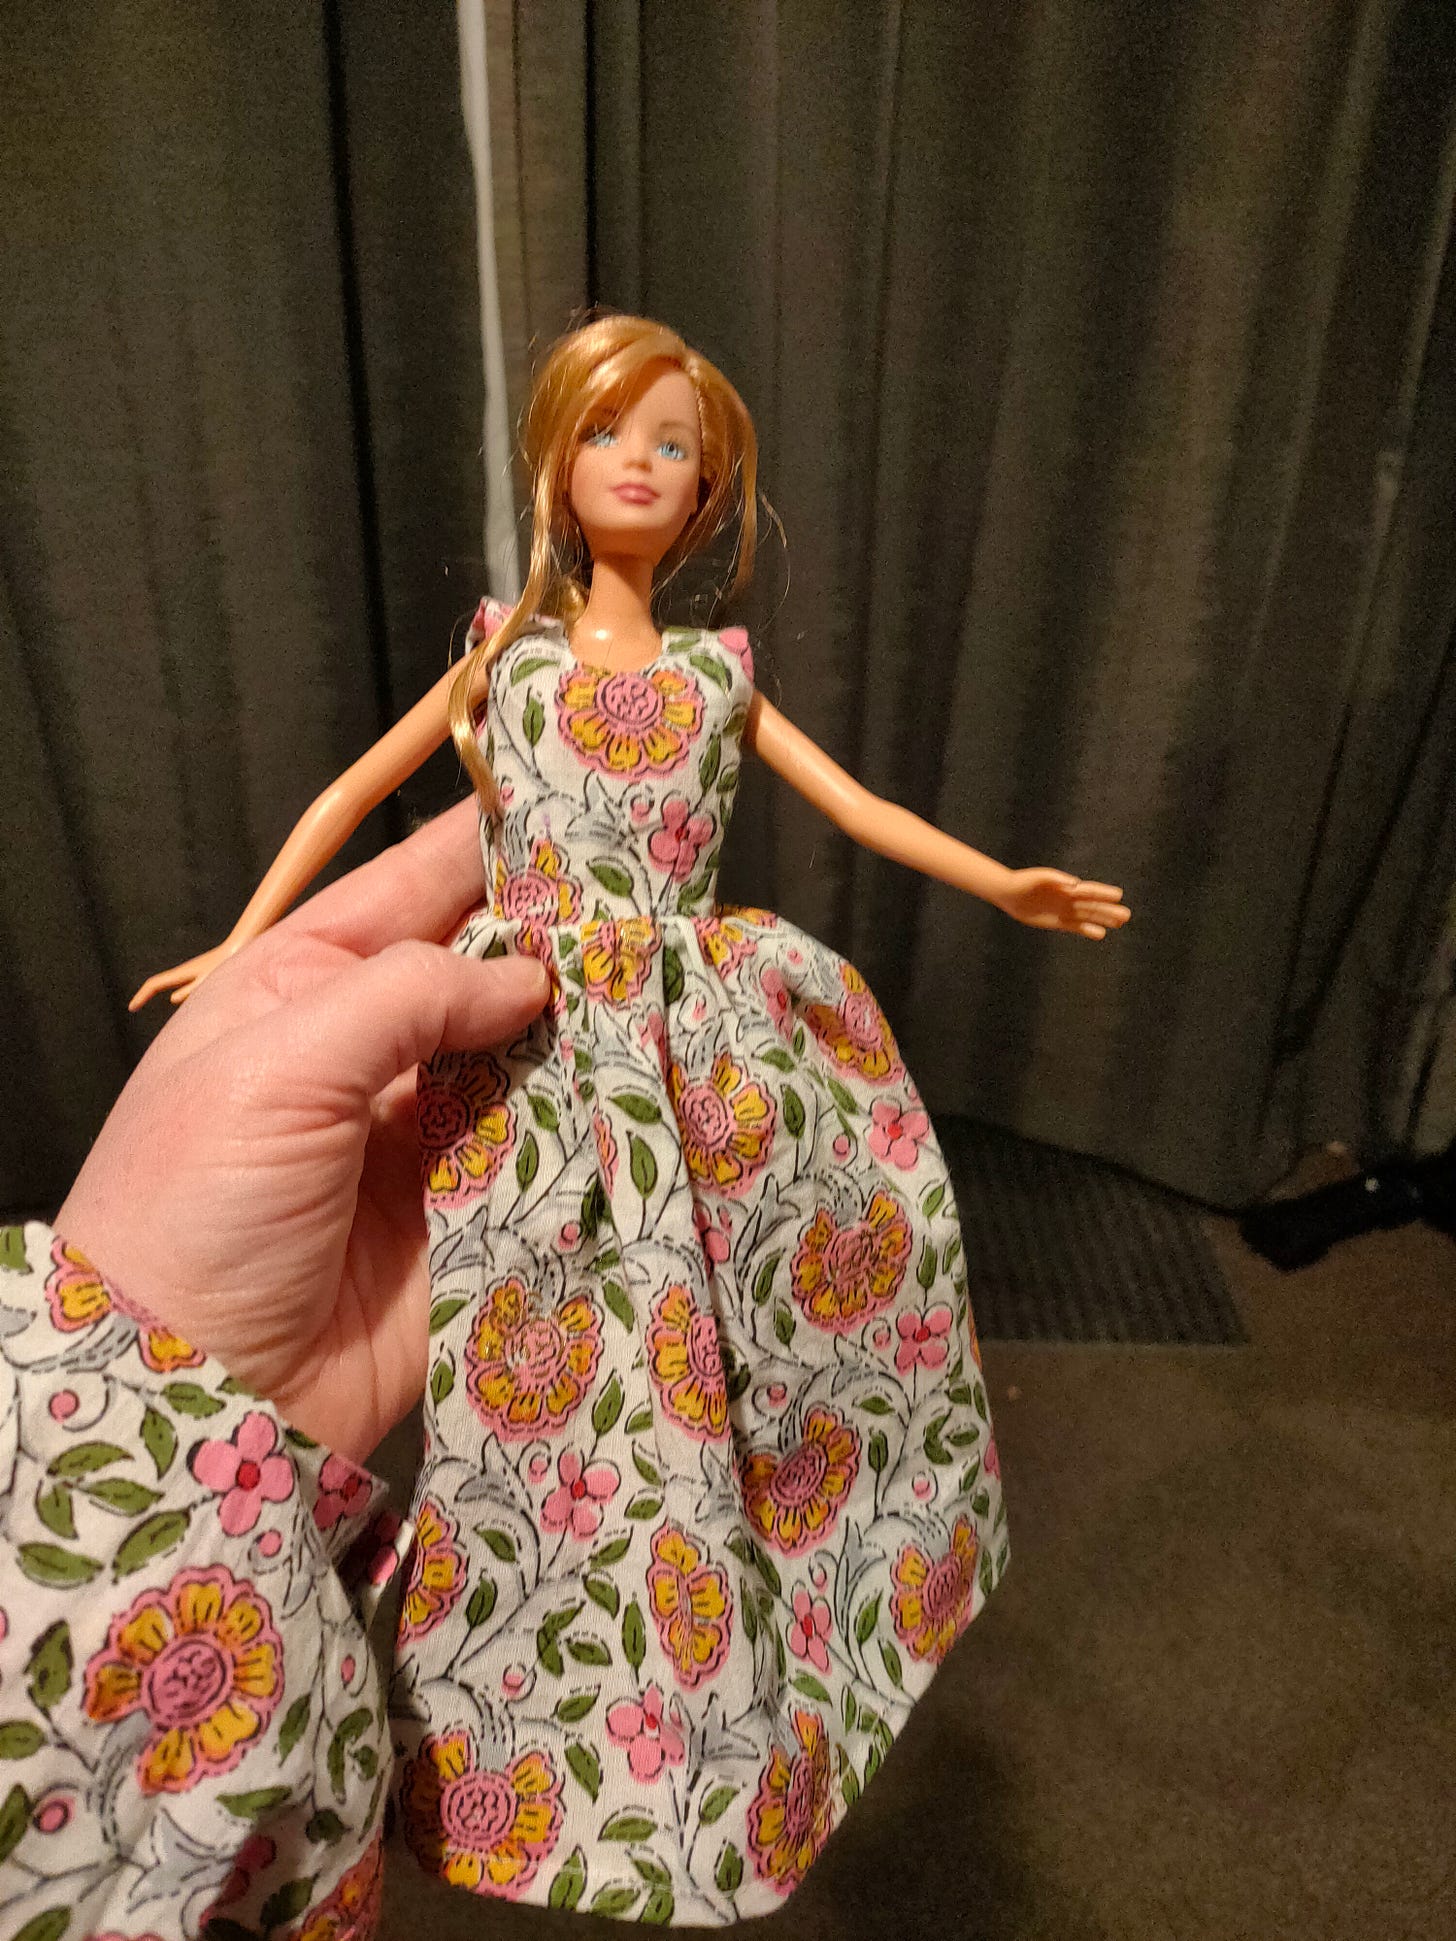 A fuzzy picture of a blonde barbie doll wearing a dress with a yellow, pink, green floral pattern long dress, with hints of gold glimmer. The hand holding the Barbie is showing a shirt cuff made from the same material. What is a midsize floral print on the human is an enormous STATEMENT PRINT on the Barbie.